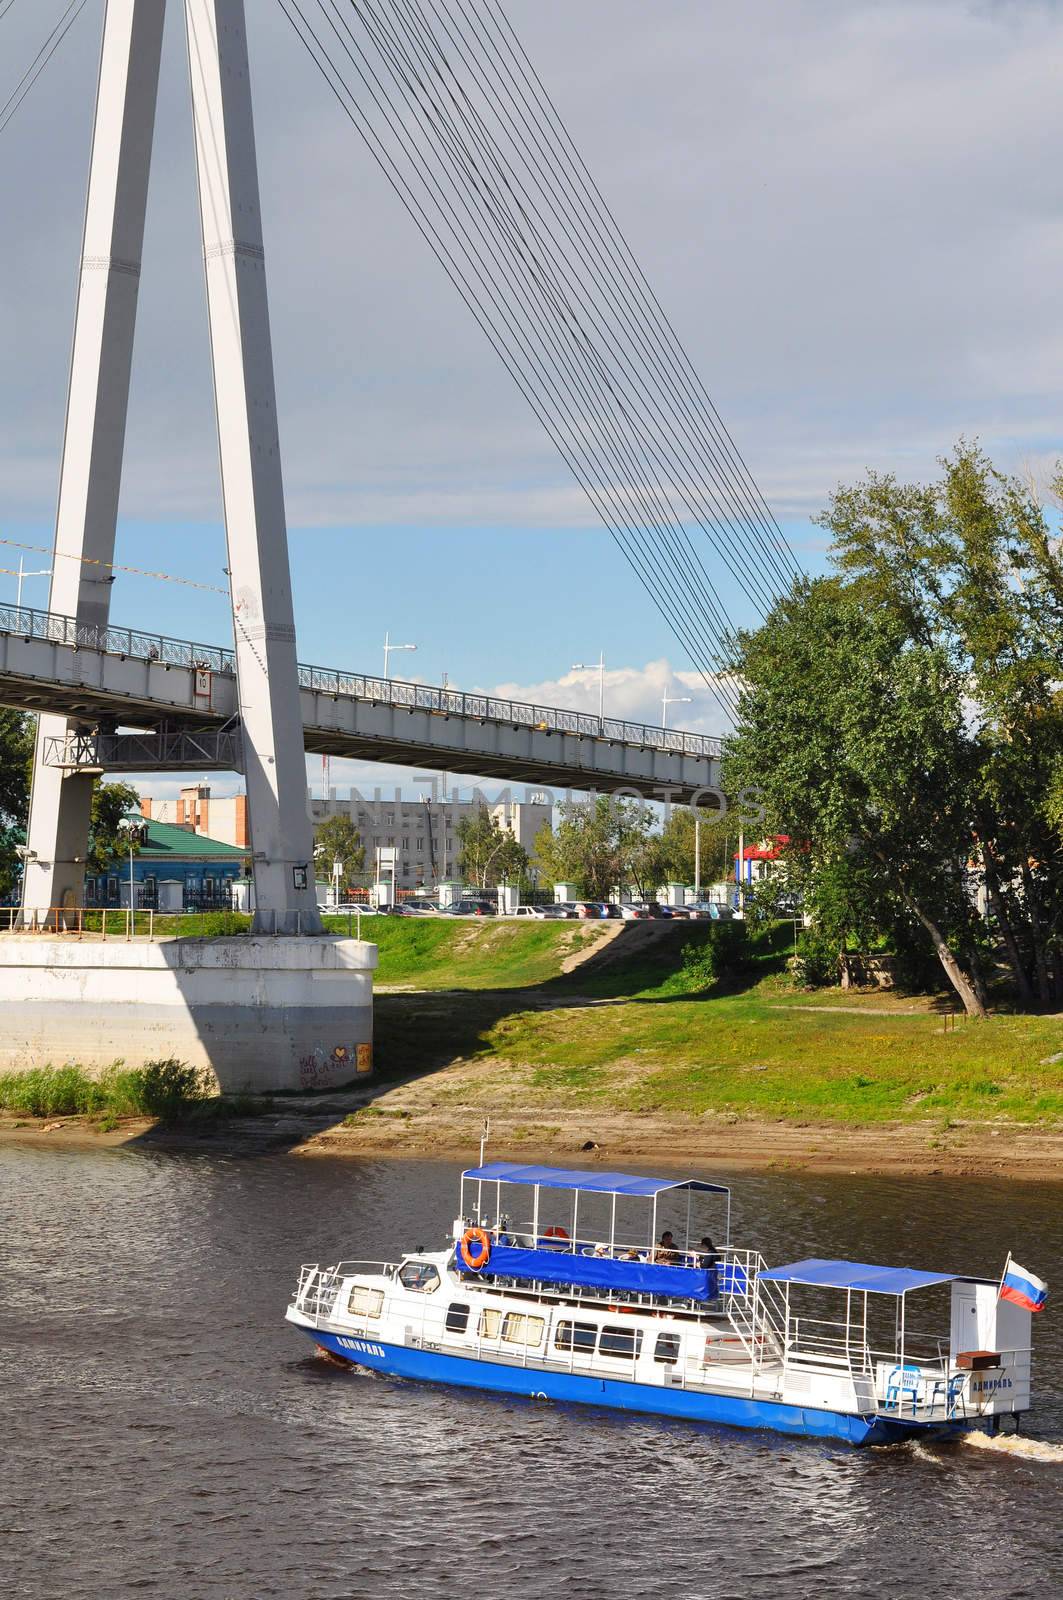 The boat "Admiral" on the Tura River in Tyumen, under the foot b by veronka72